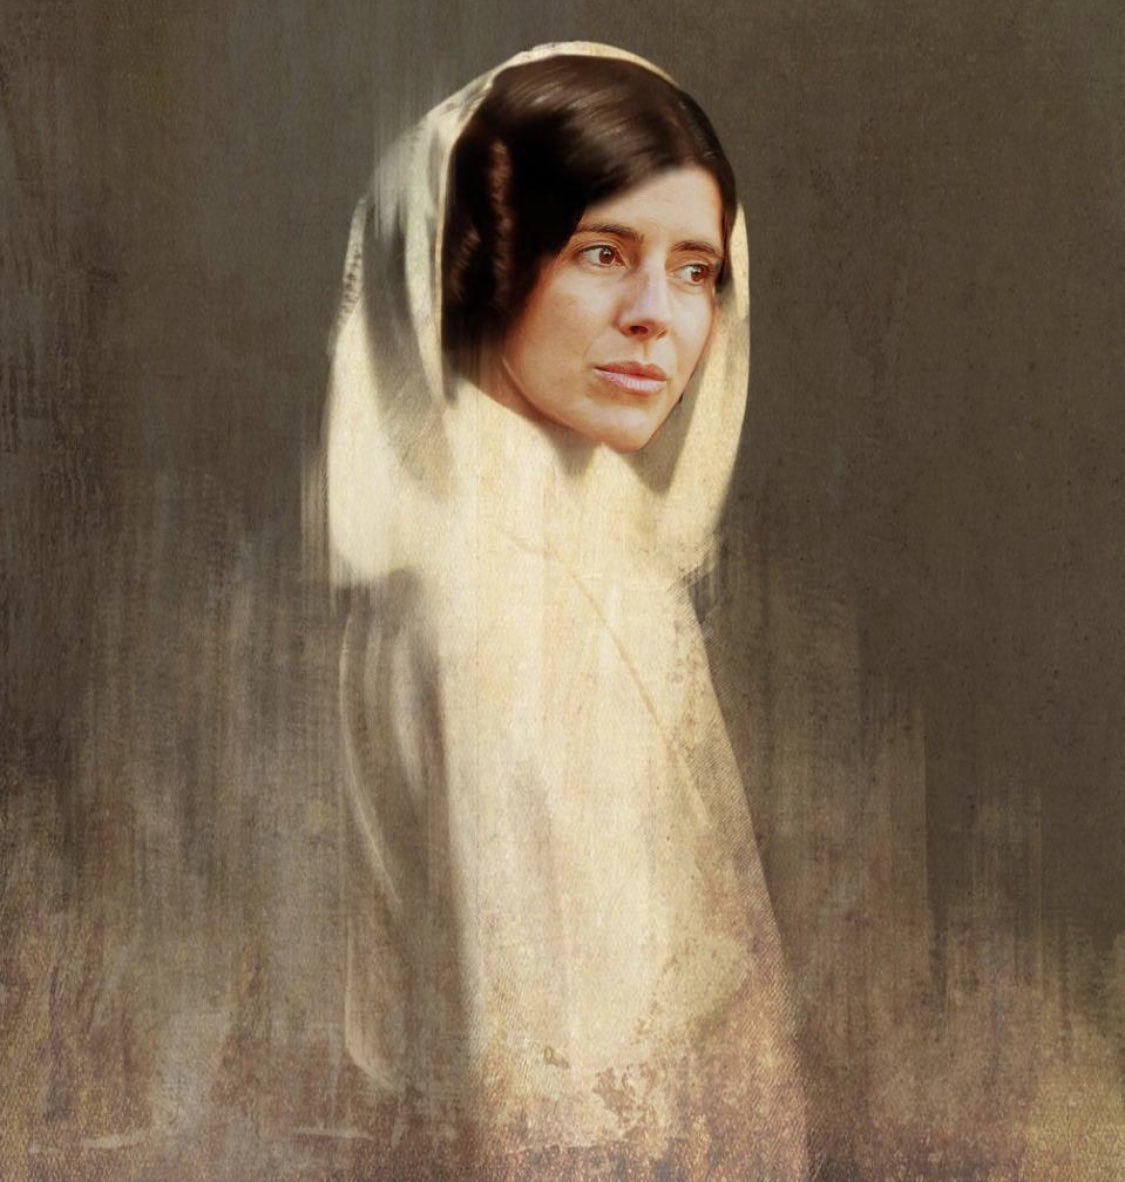 Just received this!! If Vermeer painted me in a Princess Leia costume. #maythefourth